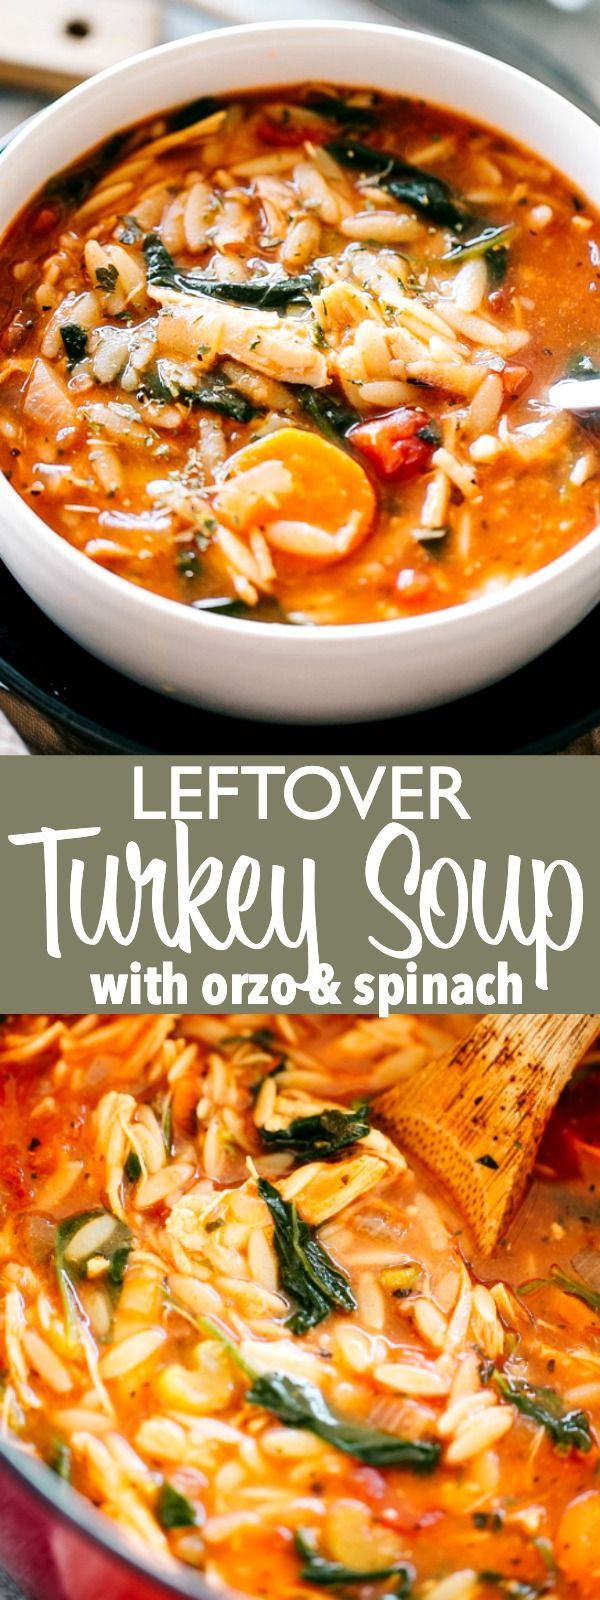 Turkey Soup Recipe with Orzo and Spinach -   19 leftover turkey recipes healthy soup ideas